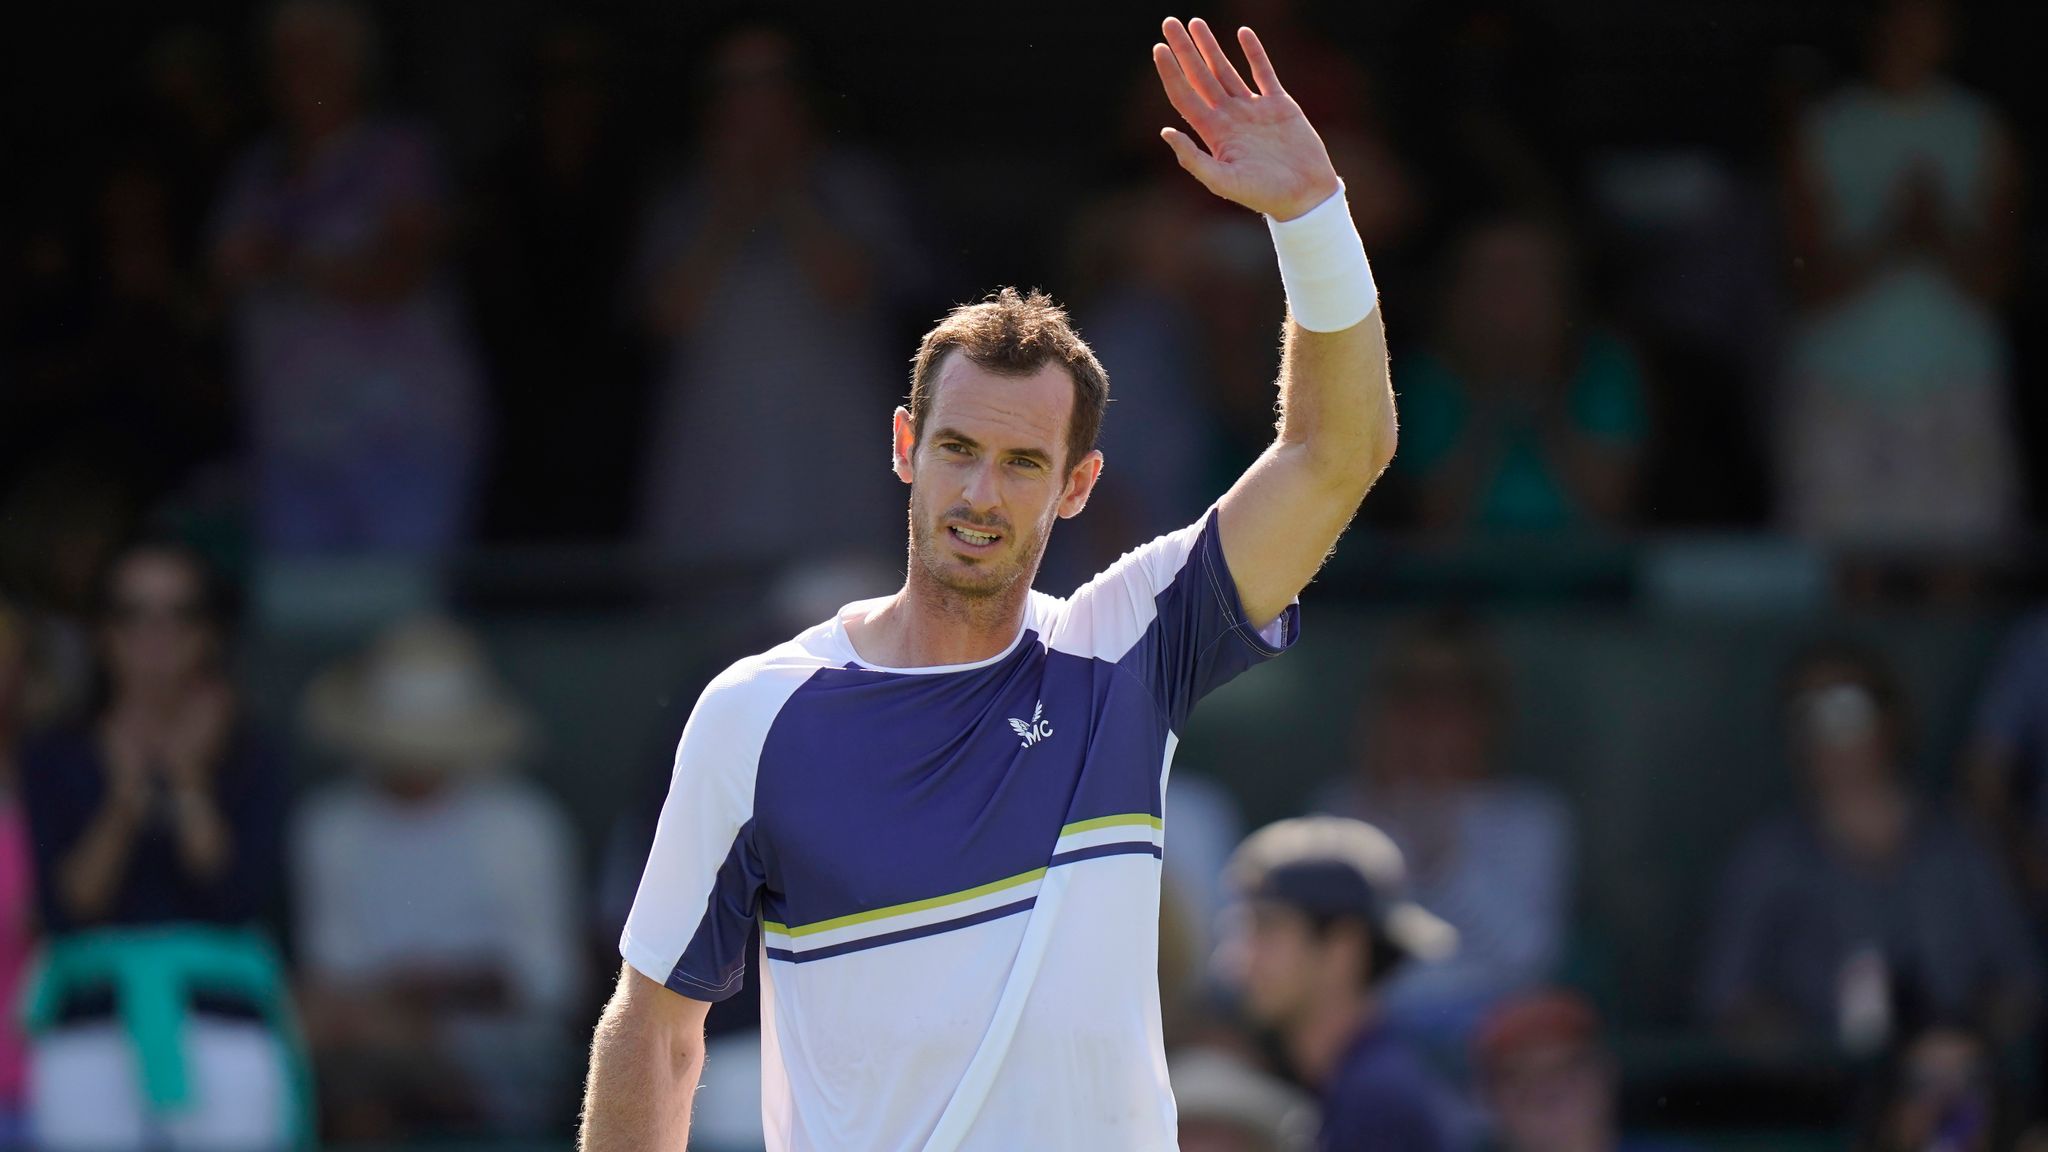 Andy Murray Former world No 1 sees his Rhode Island journey ended by Alexander Bublik Tennis News Sky Sports